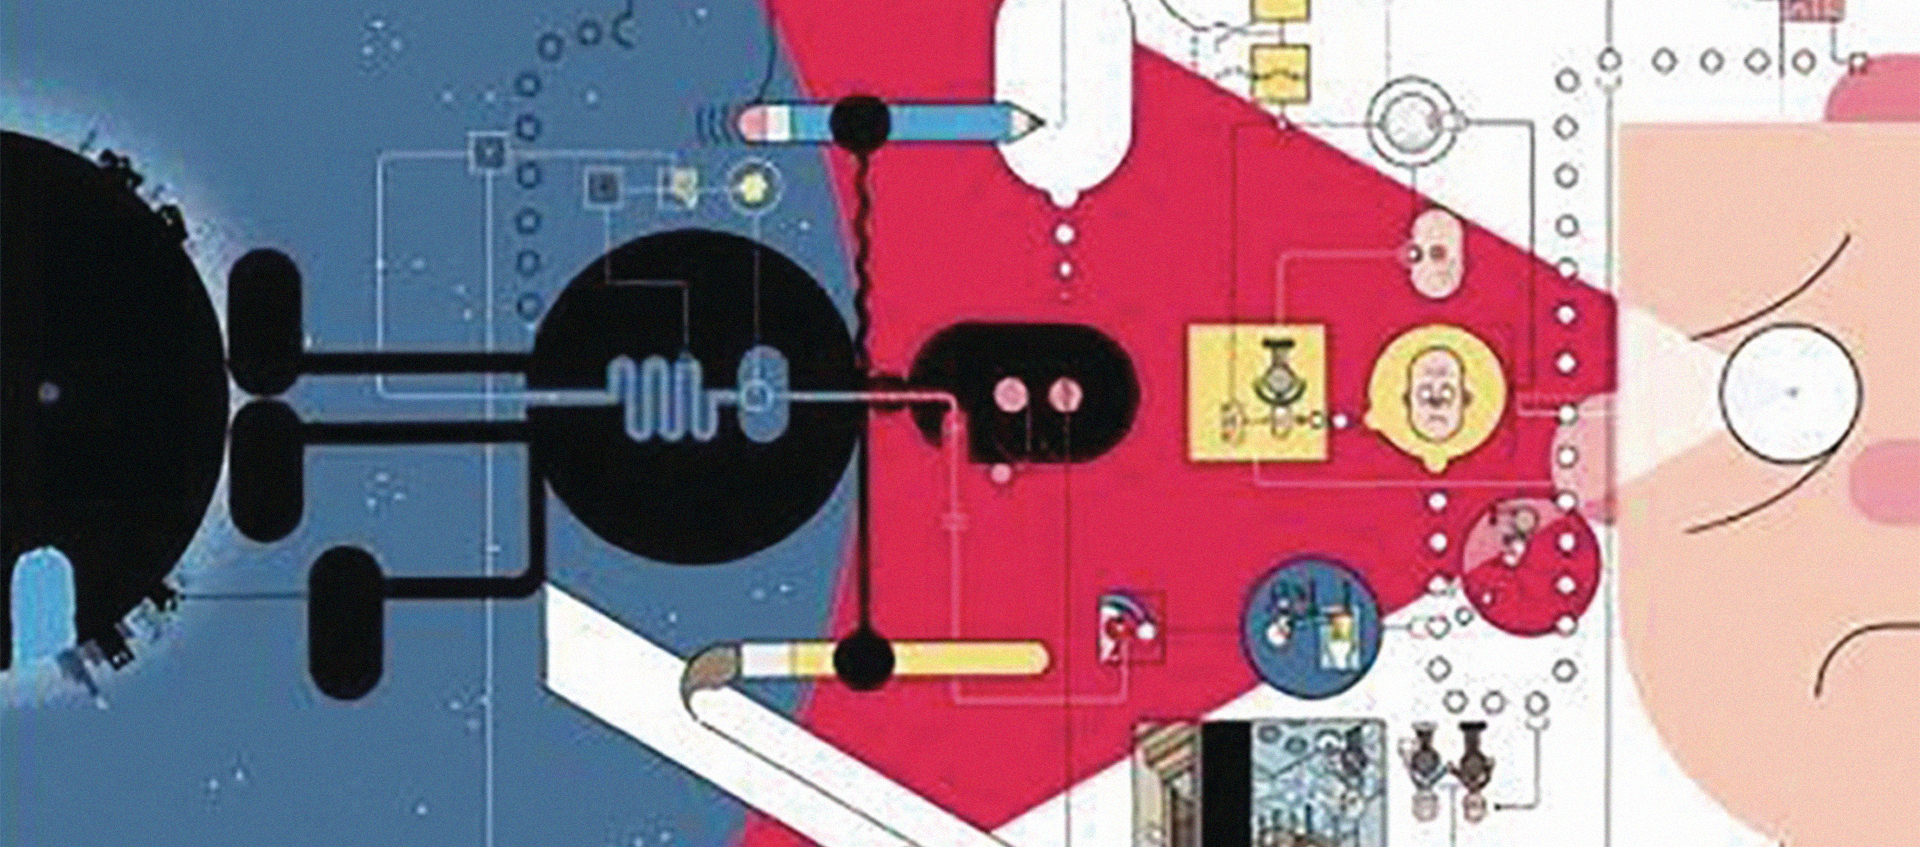 "Monograph" by Chris Ware